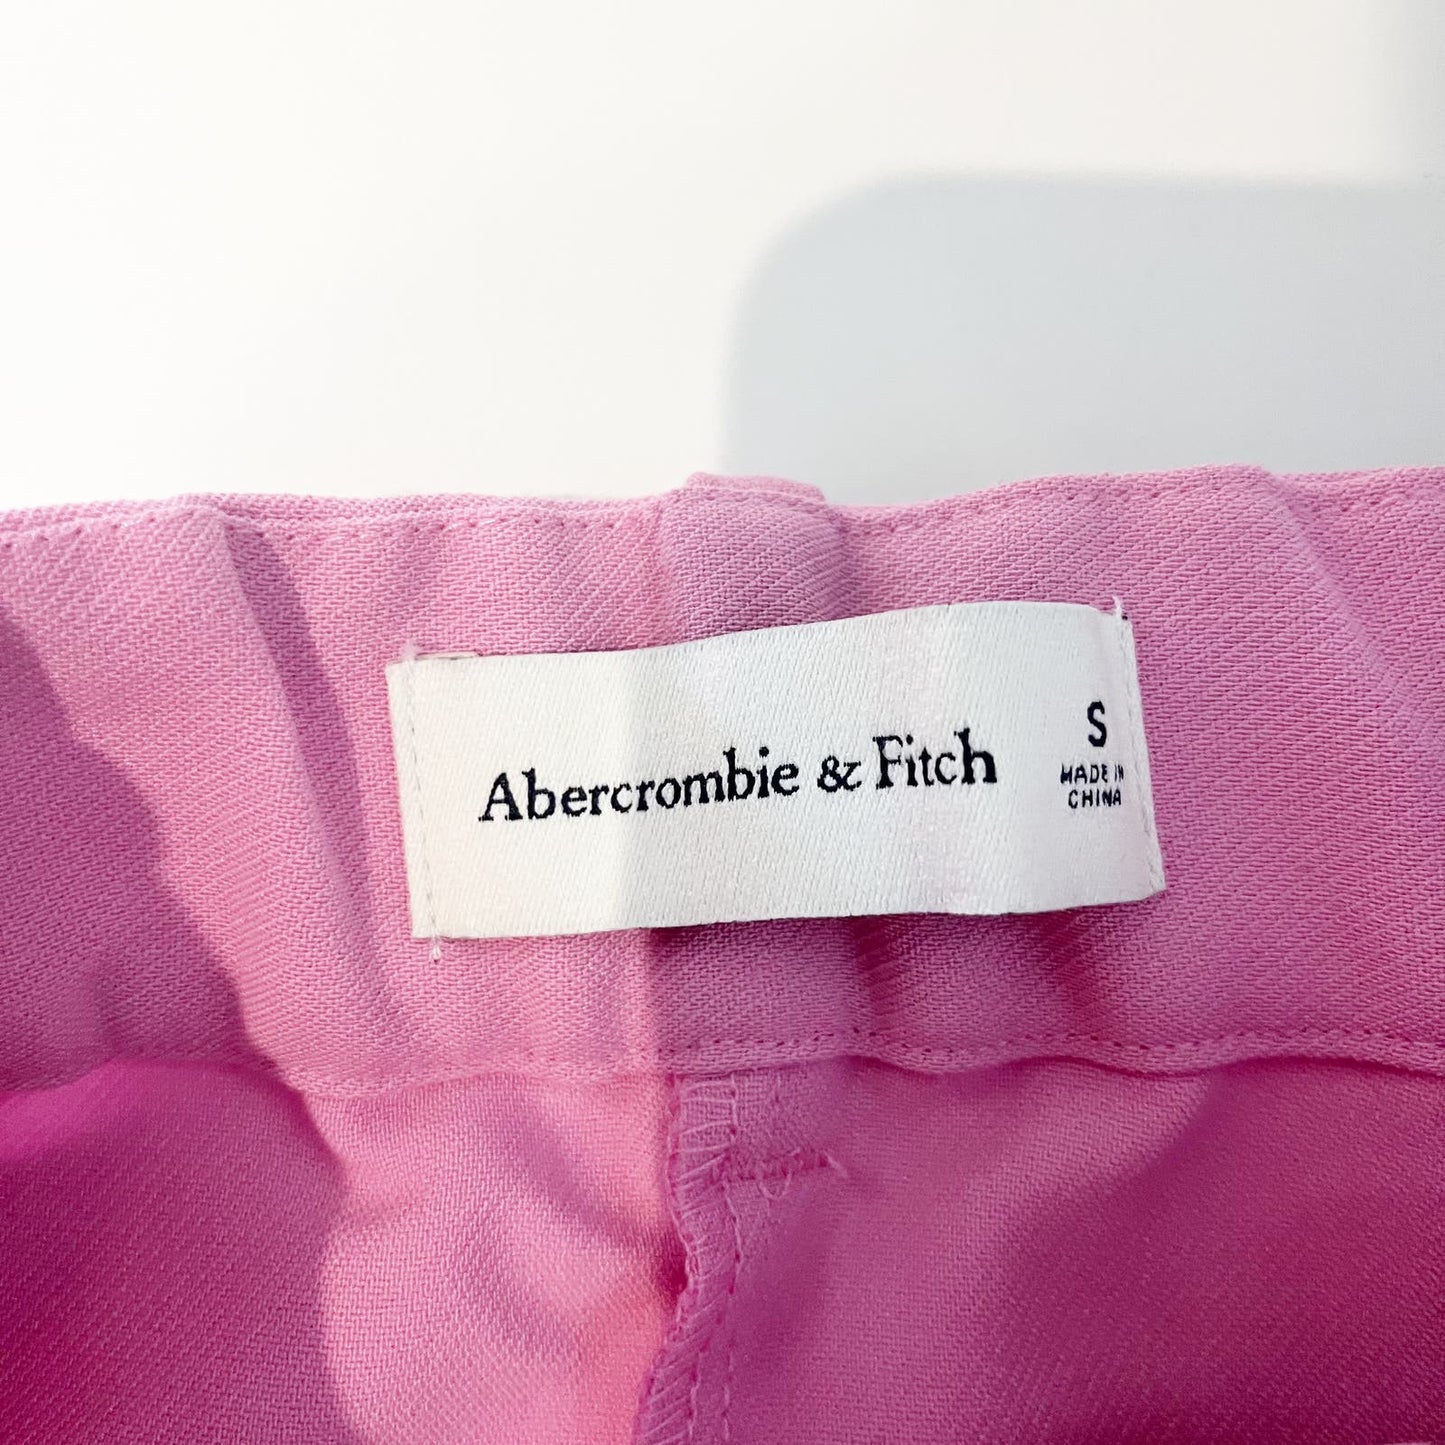 Abercrombie & Fitch Ultra High Rise Pleated Tailored Shorts Pink Small